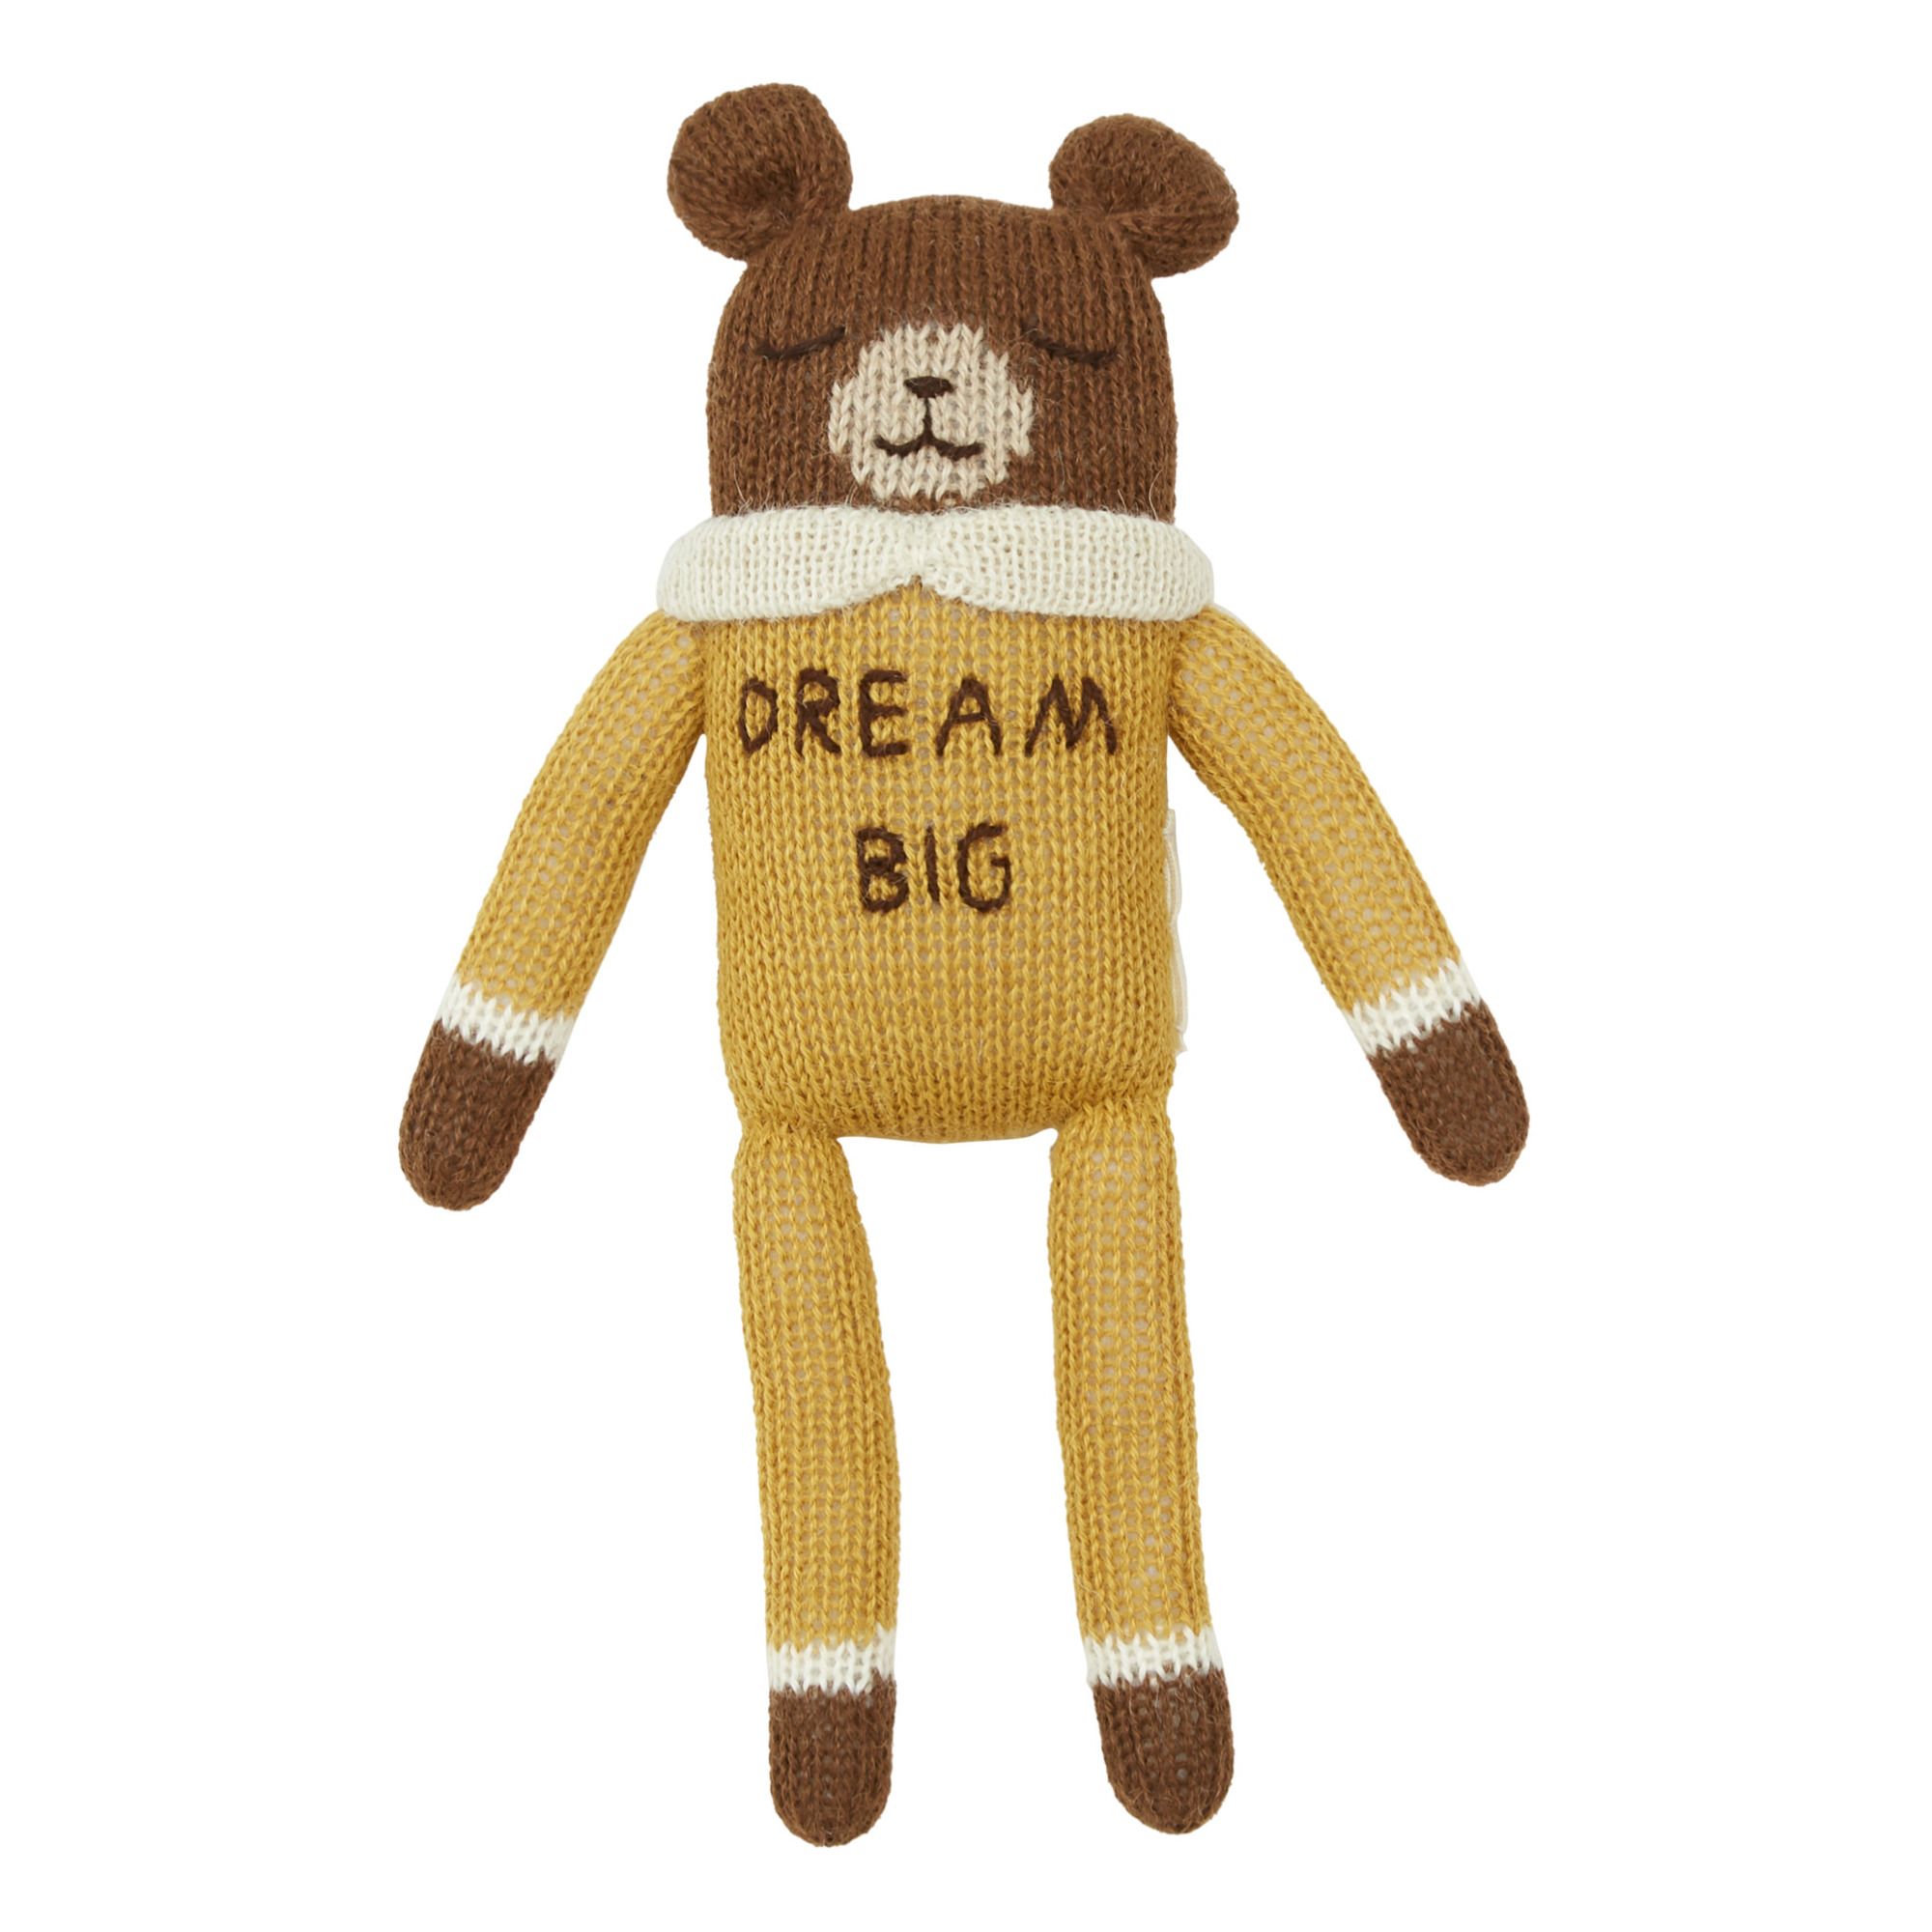 Main Sauvage - Doudou ours Dream Big Main Sauvage X Smallable - Ocre